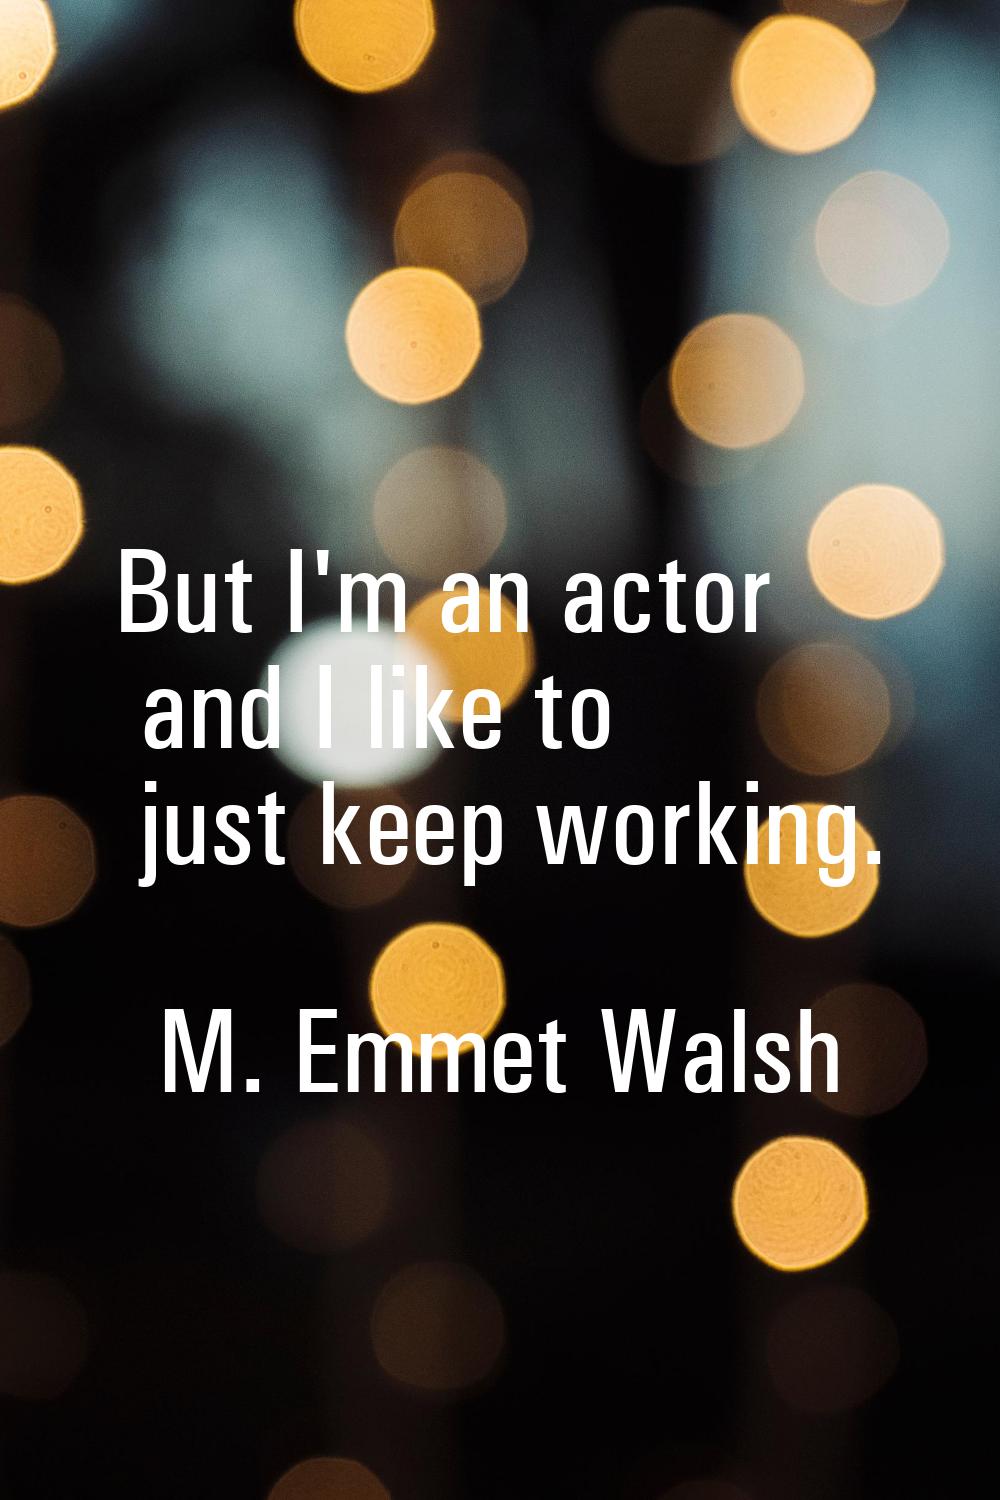 But I'm an actor and I like to just keep working.